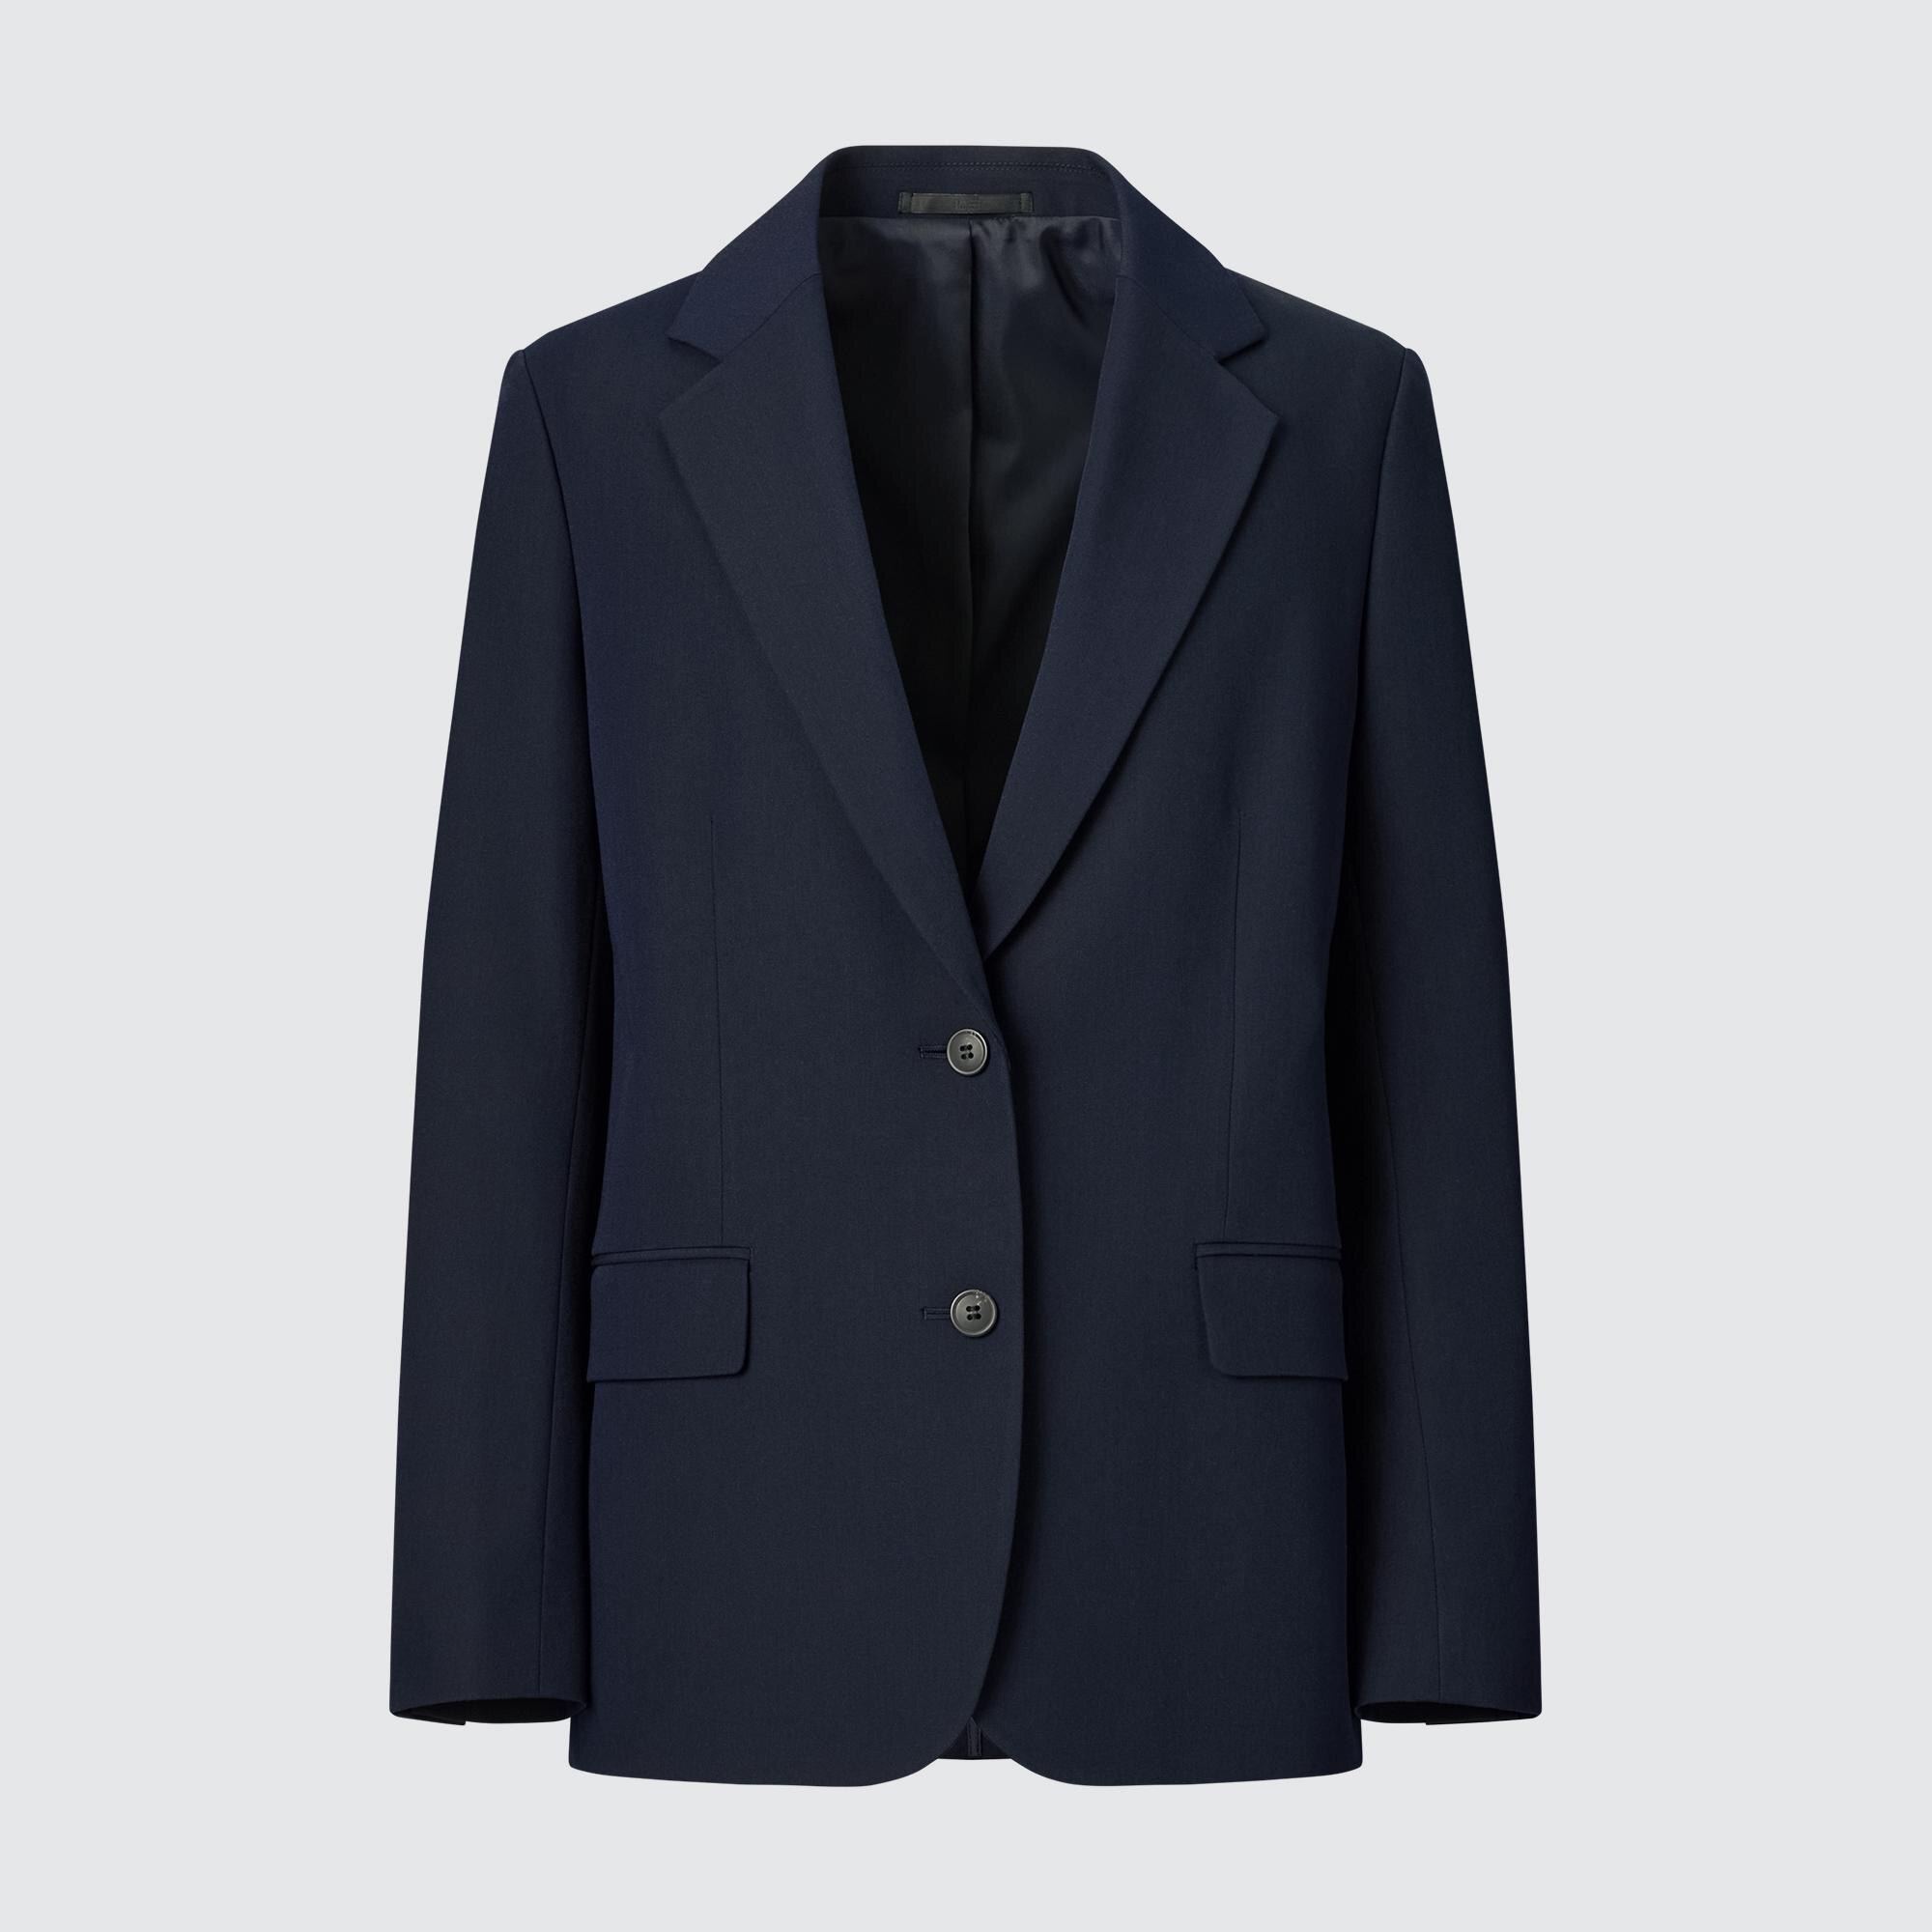 Relaxed Fit Tailored Jacket | UNIQLO